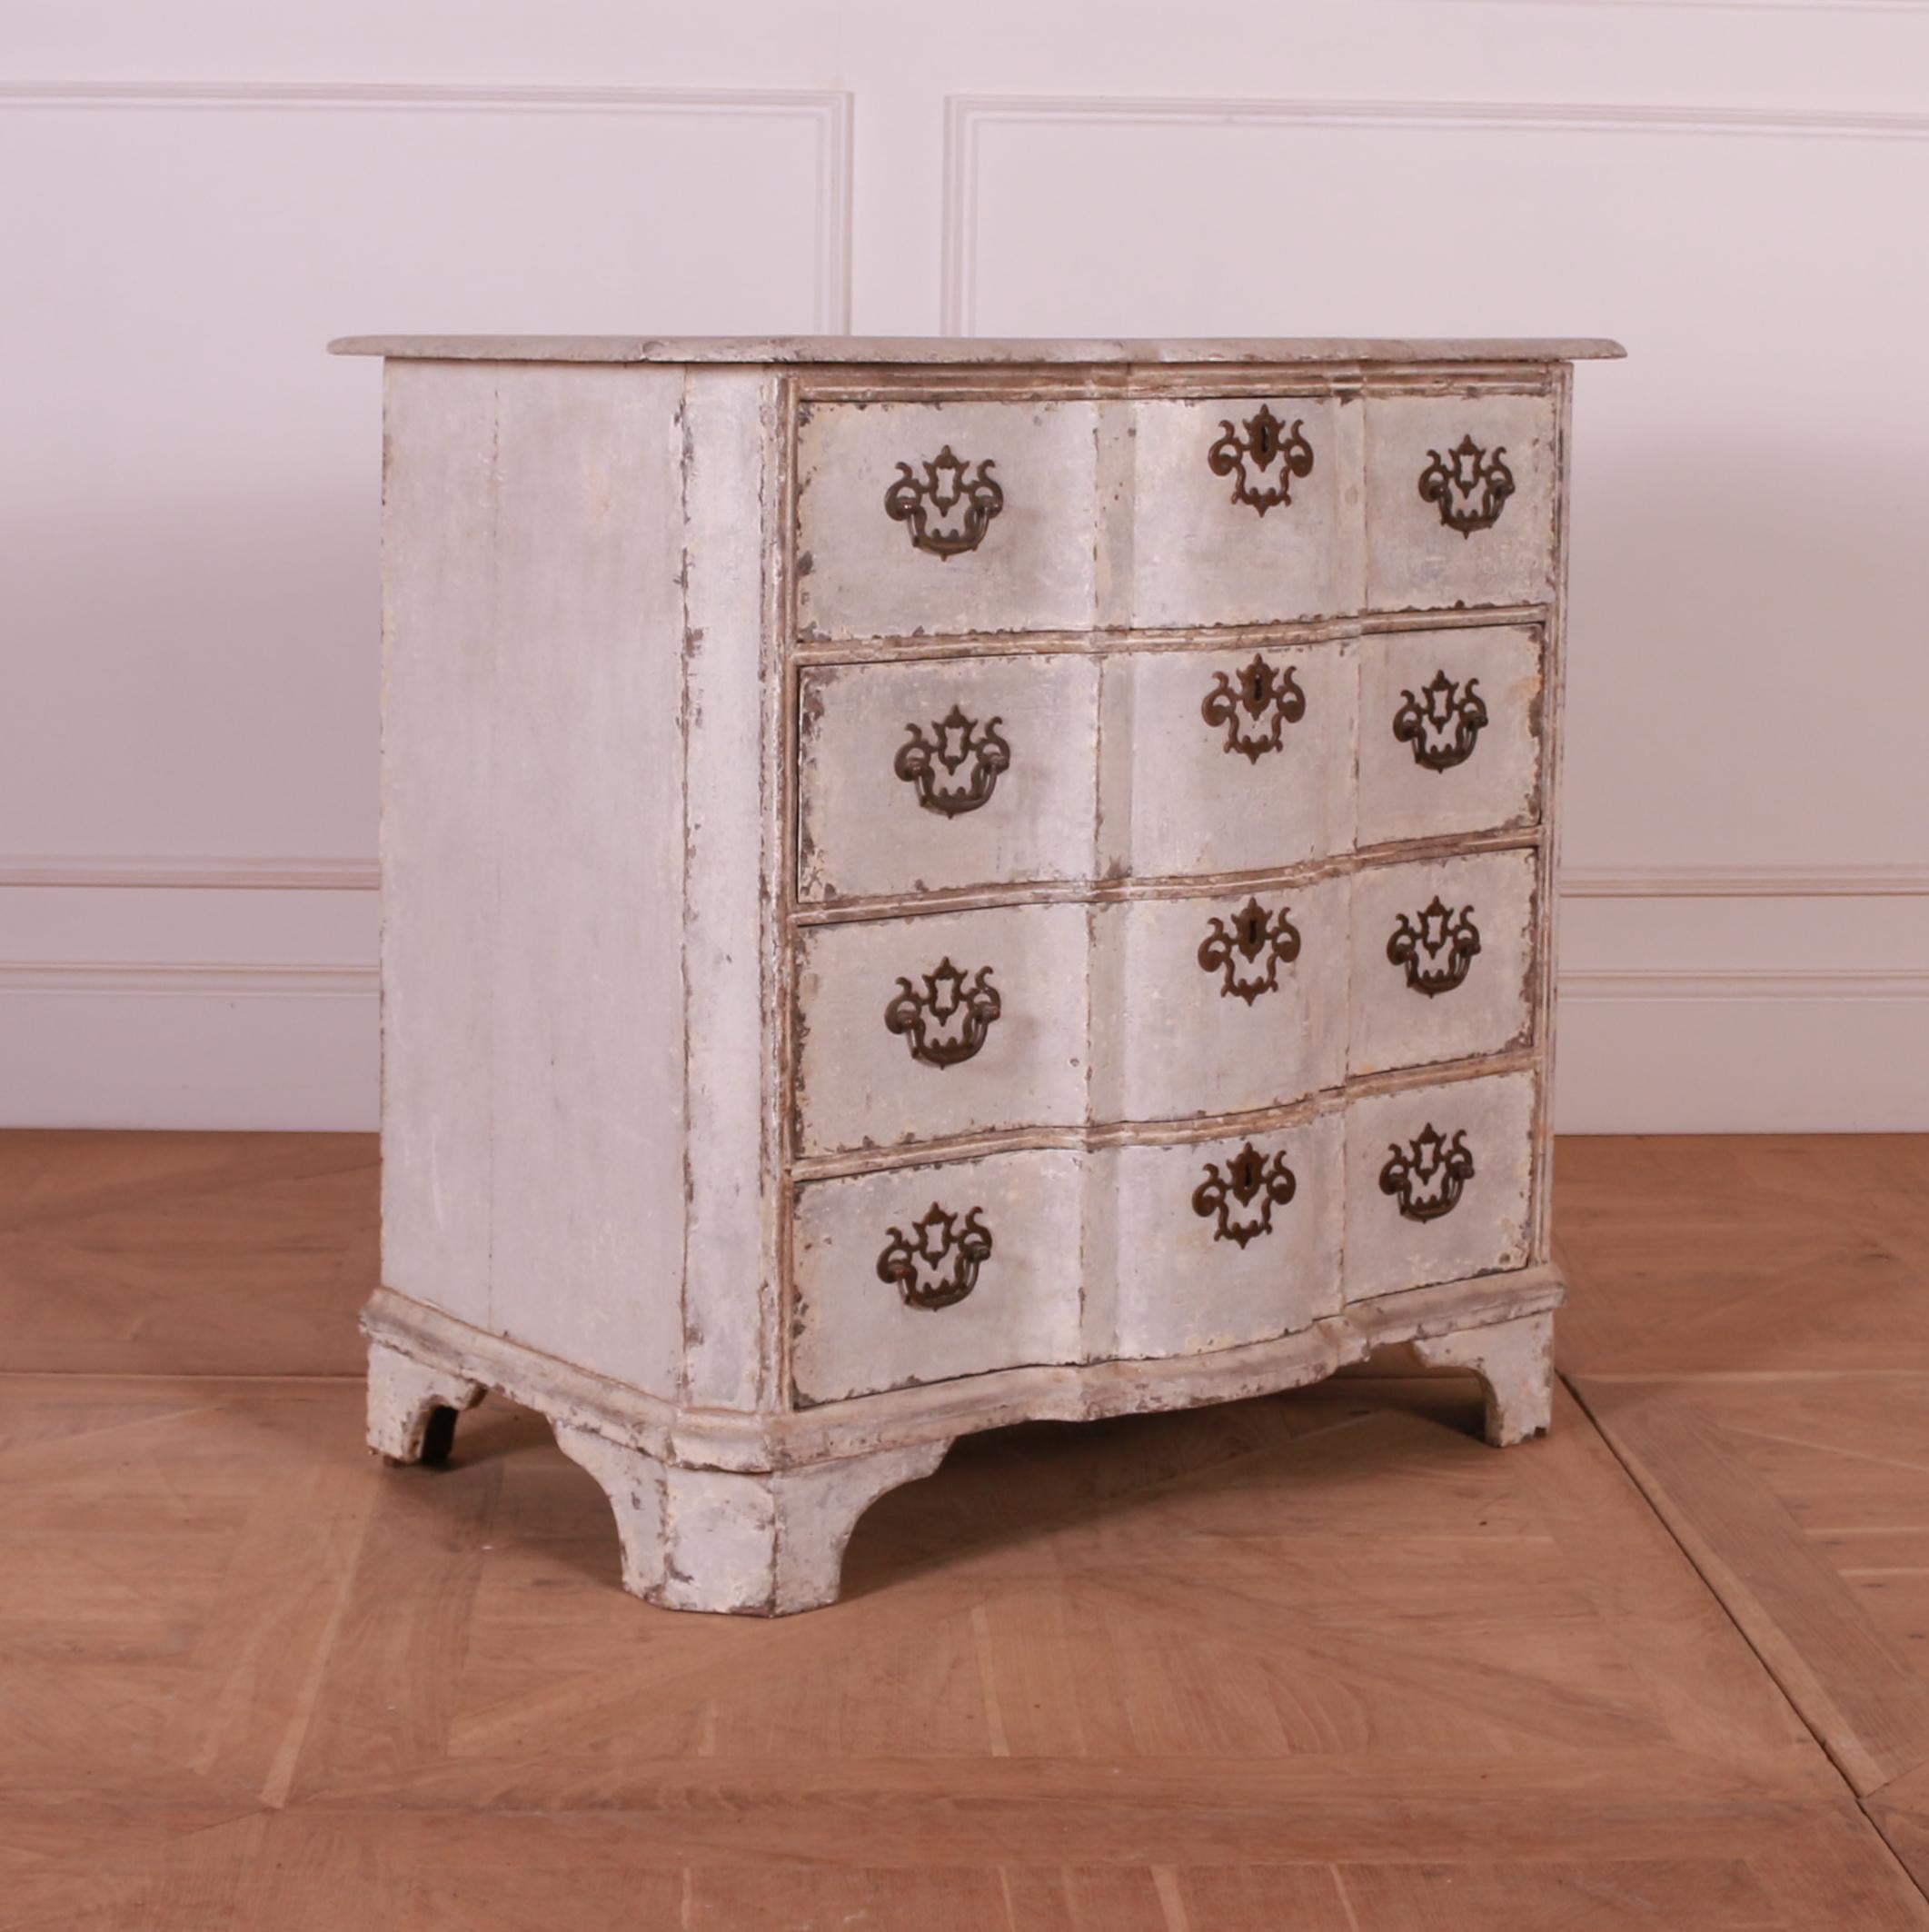 18th C Dutch painted serpentine commode. 1780.

Dimensions
35 inches (89 cms) Wide
21 inches (53 cms) Deep
33 inches (84 cms) High.

   